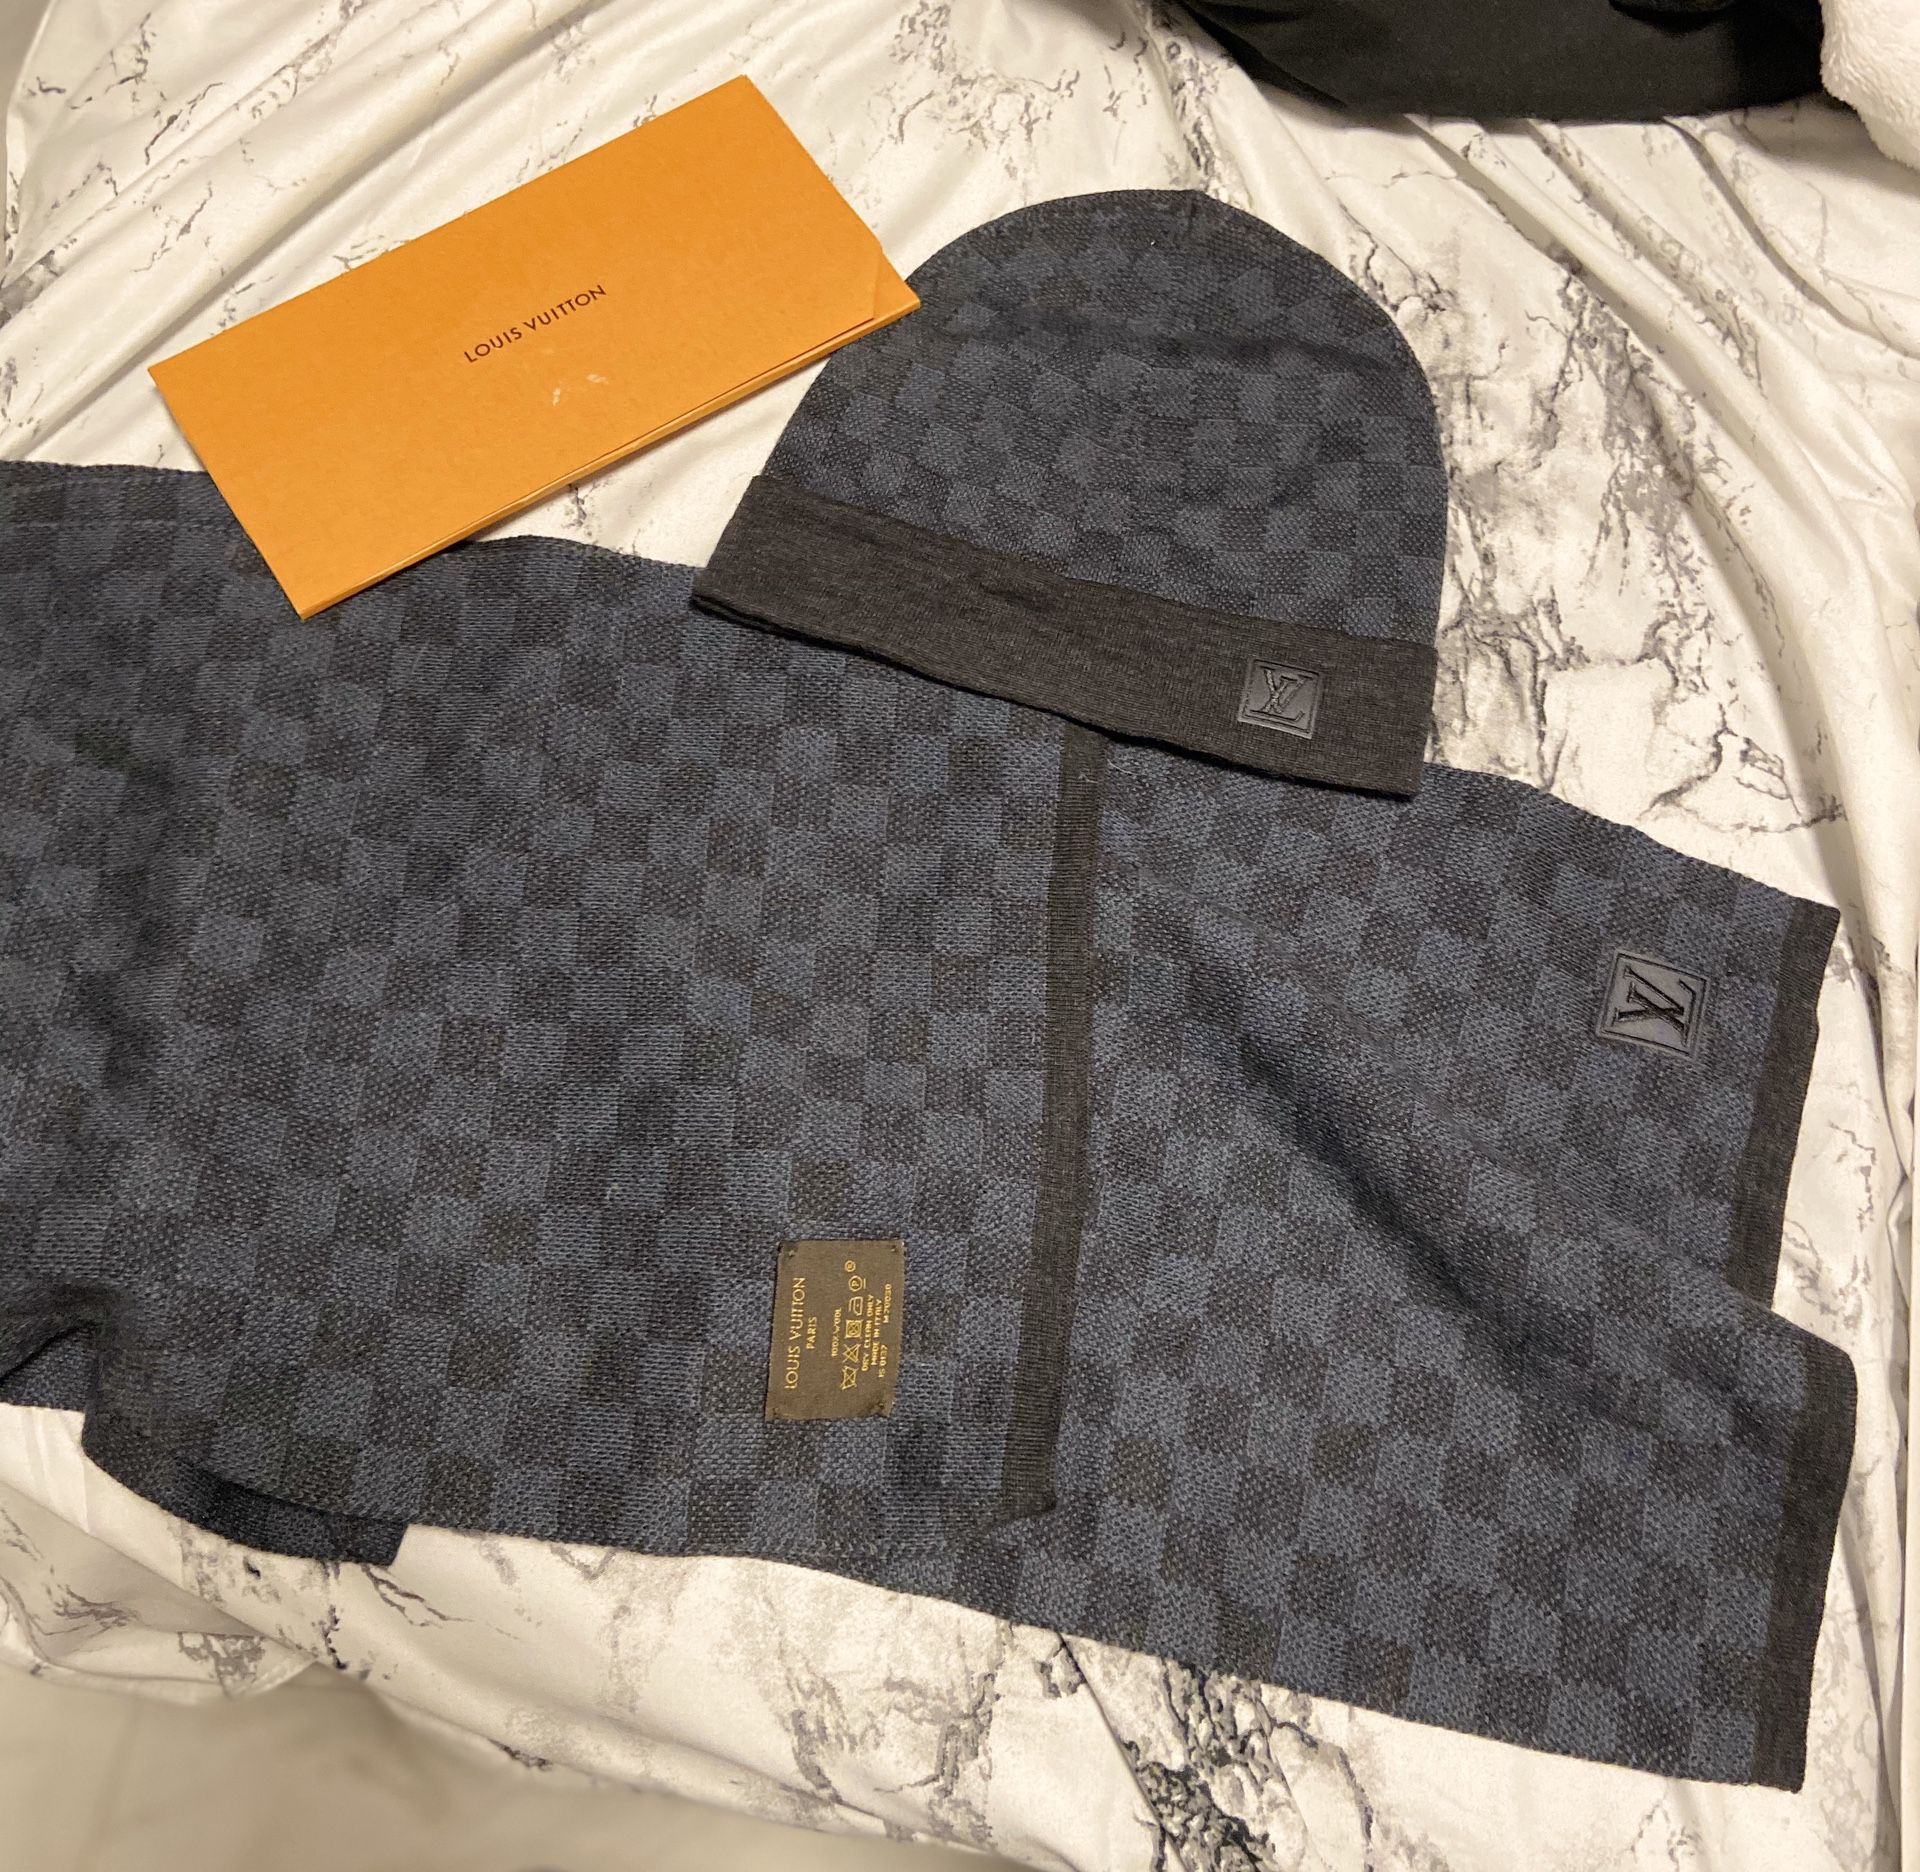 LOUIS VUITTON DAMIER PETITE SCARF AND HAT (i have receipts and card)